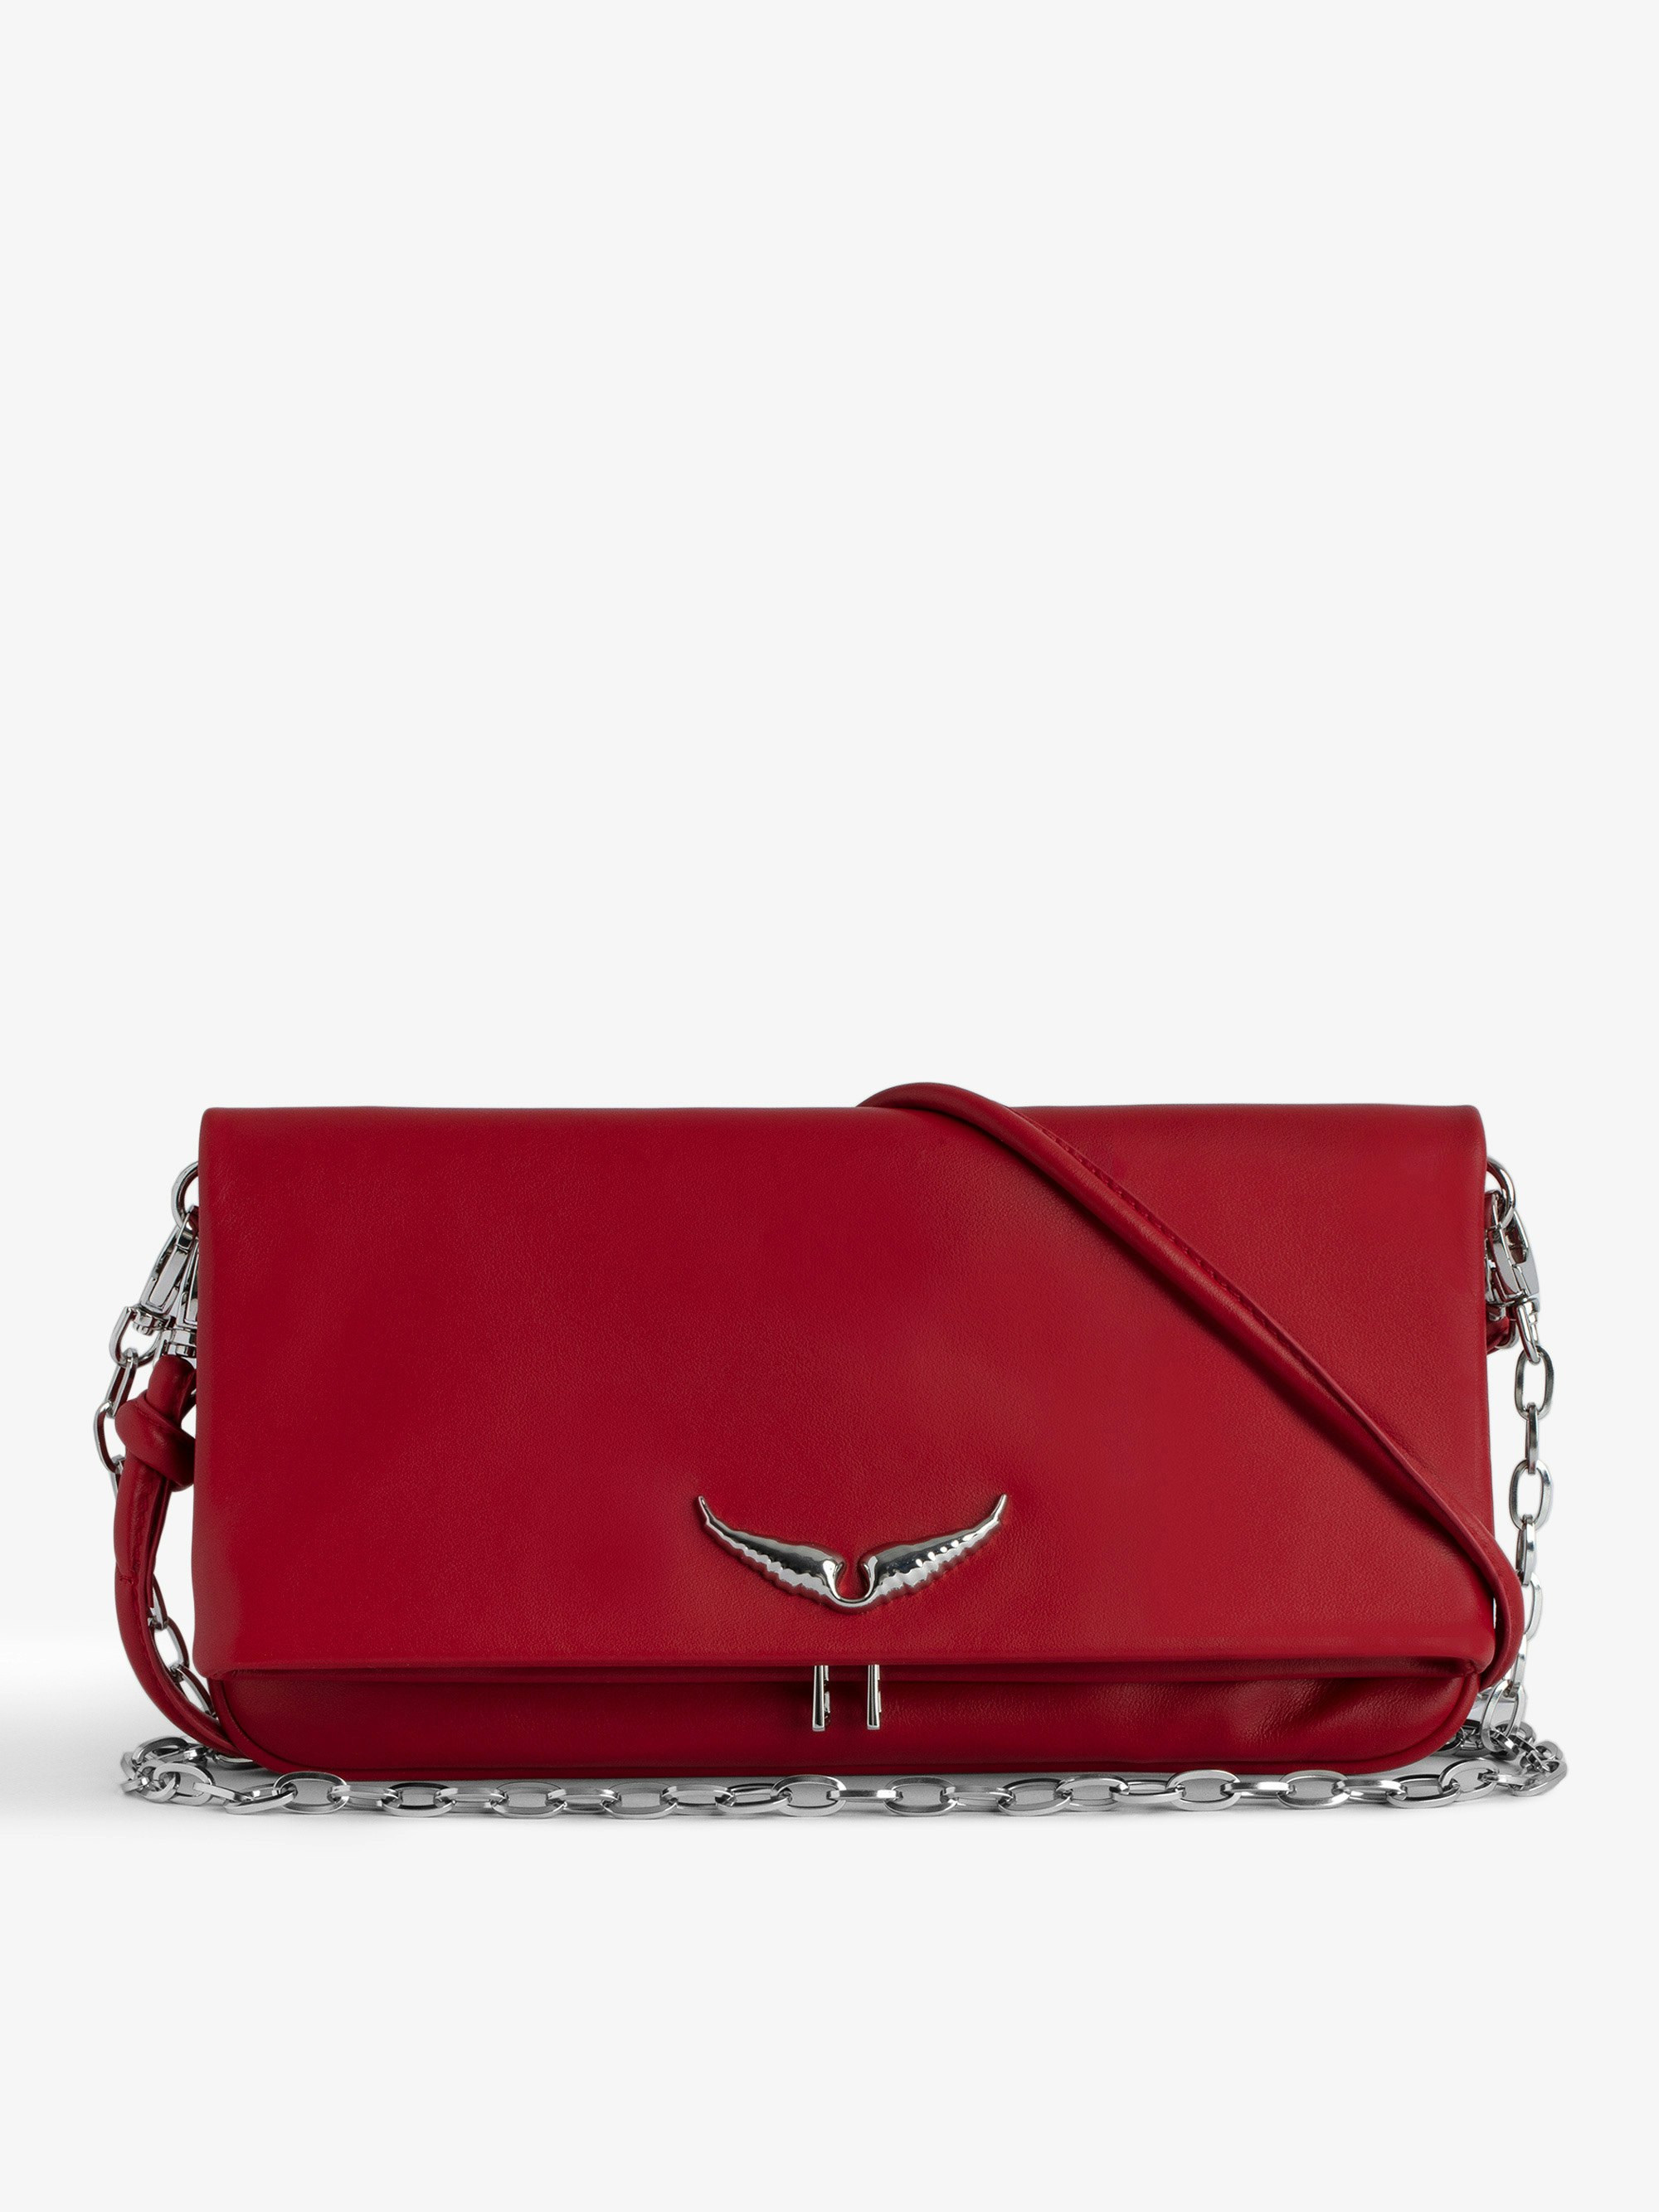 Rock Eternal Clutch - Women’s red smooth leather clutch with double leather and chain straps.